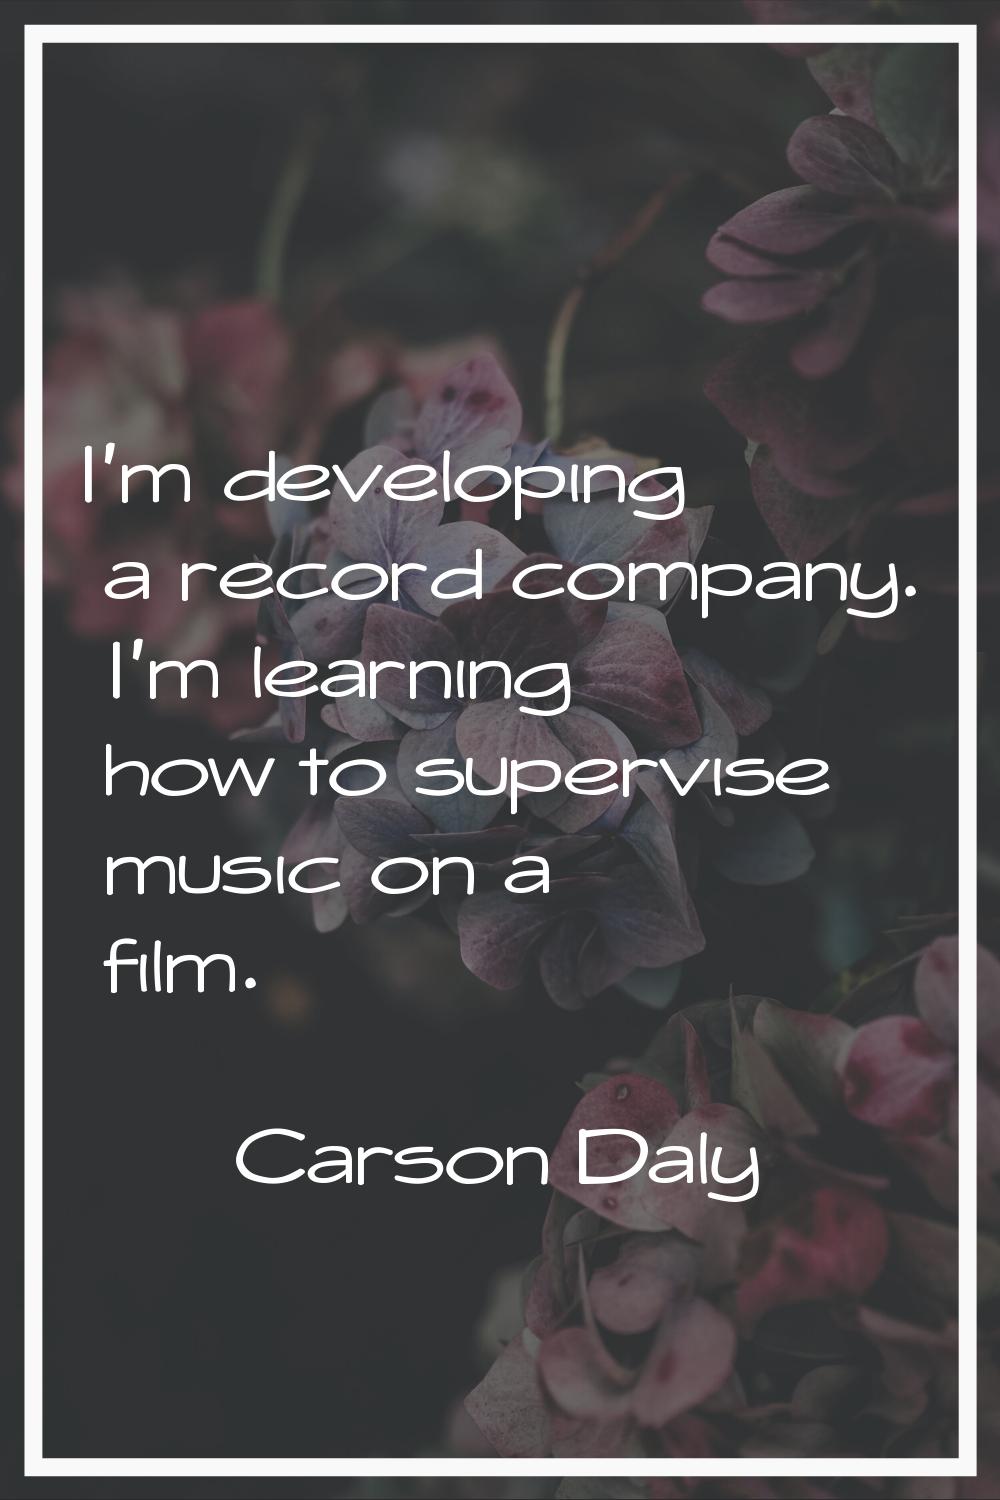 I'm developing a record company. I'm learning how to supervise music on a film.